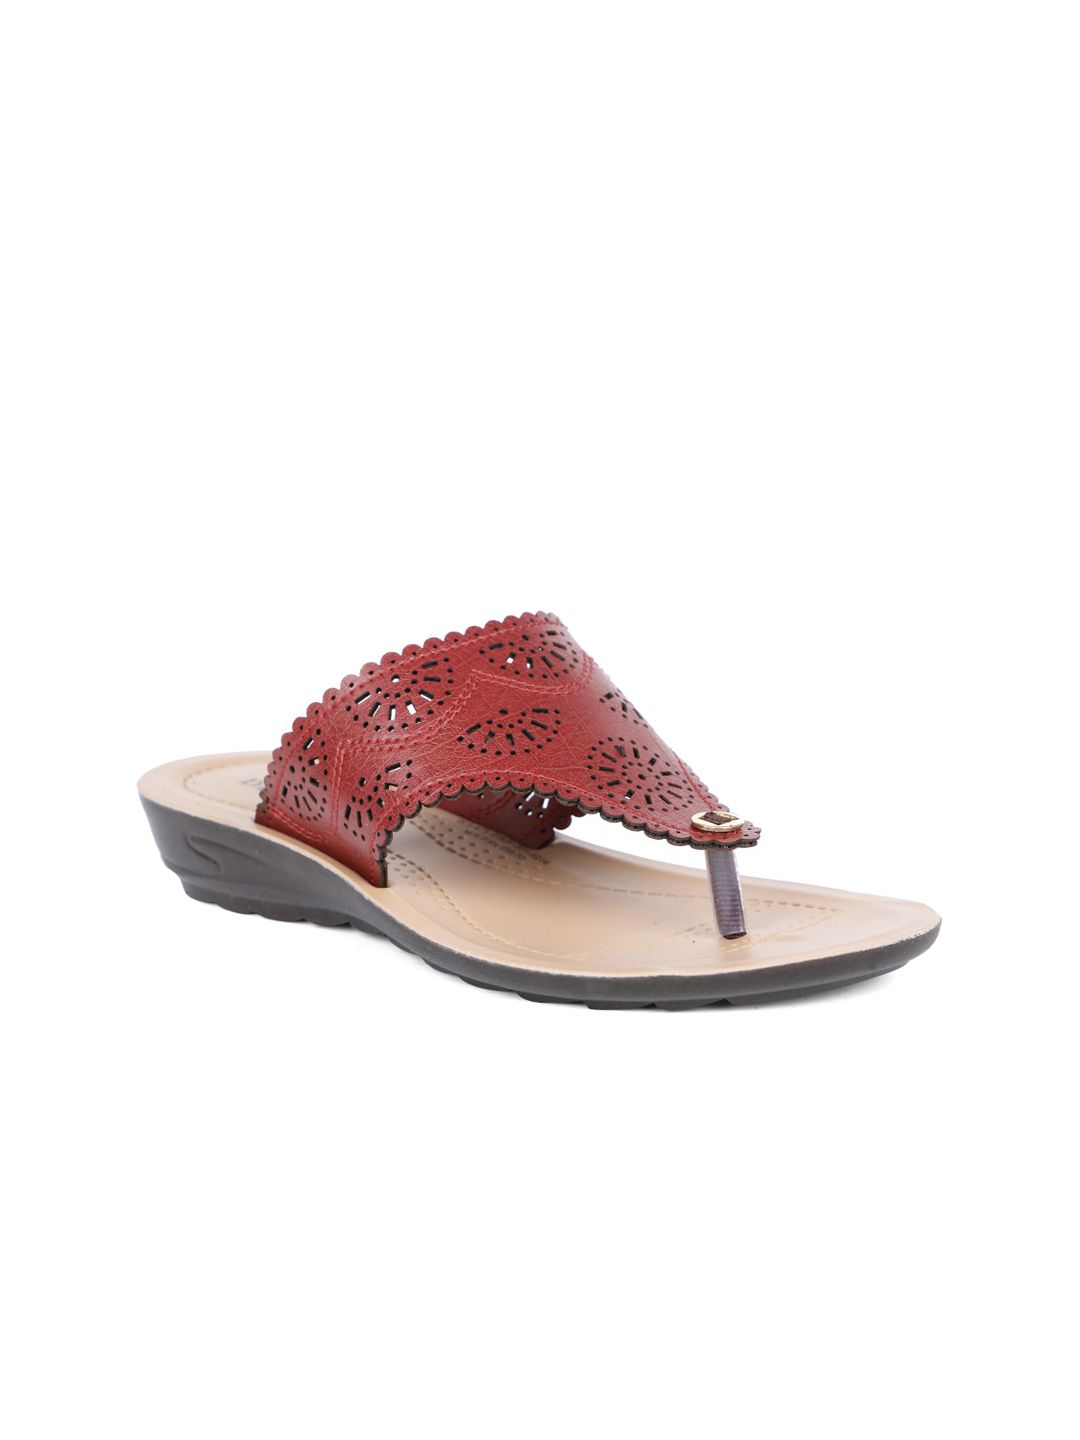 Bata Women Maroon Open Toe Flats with Laser Cuts Price in India